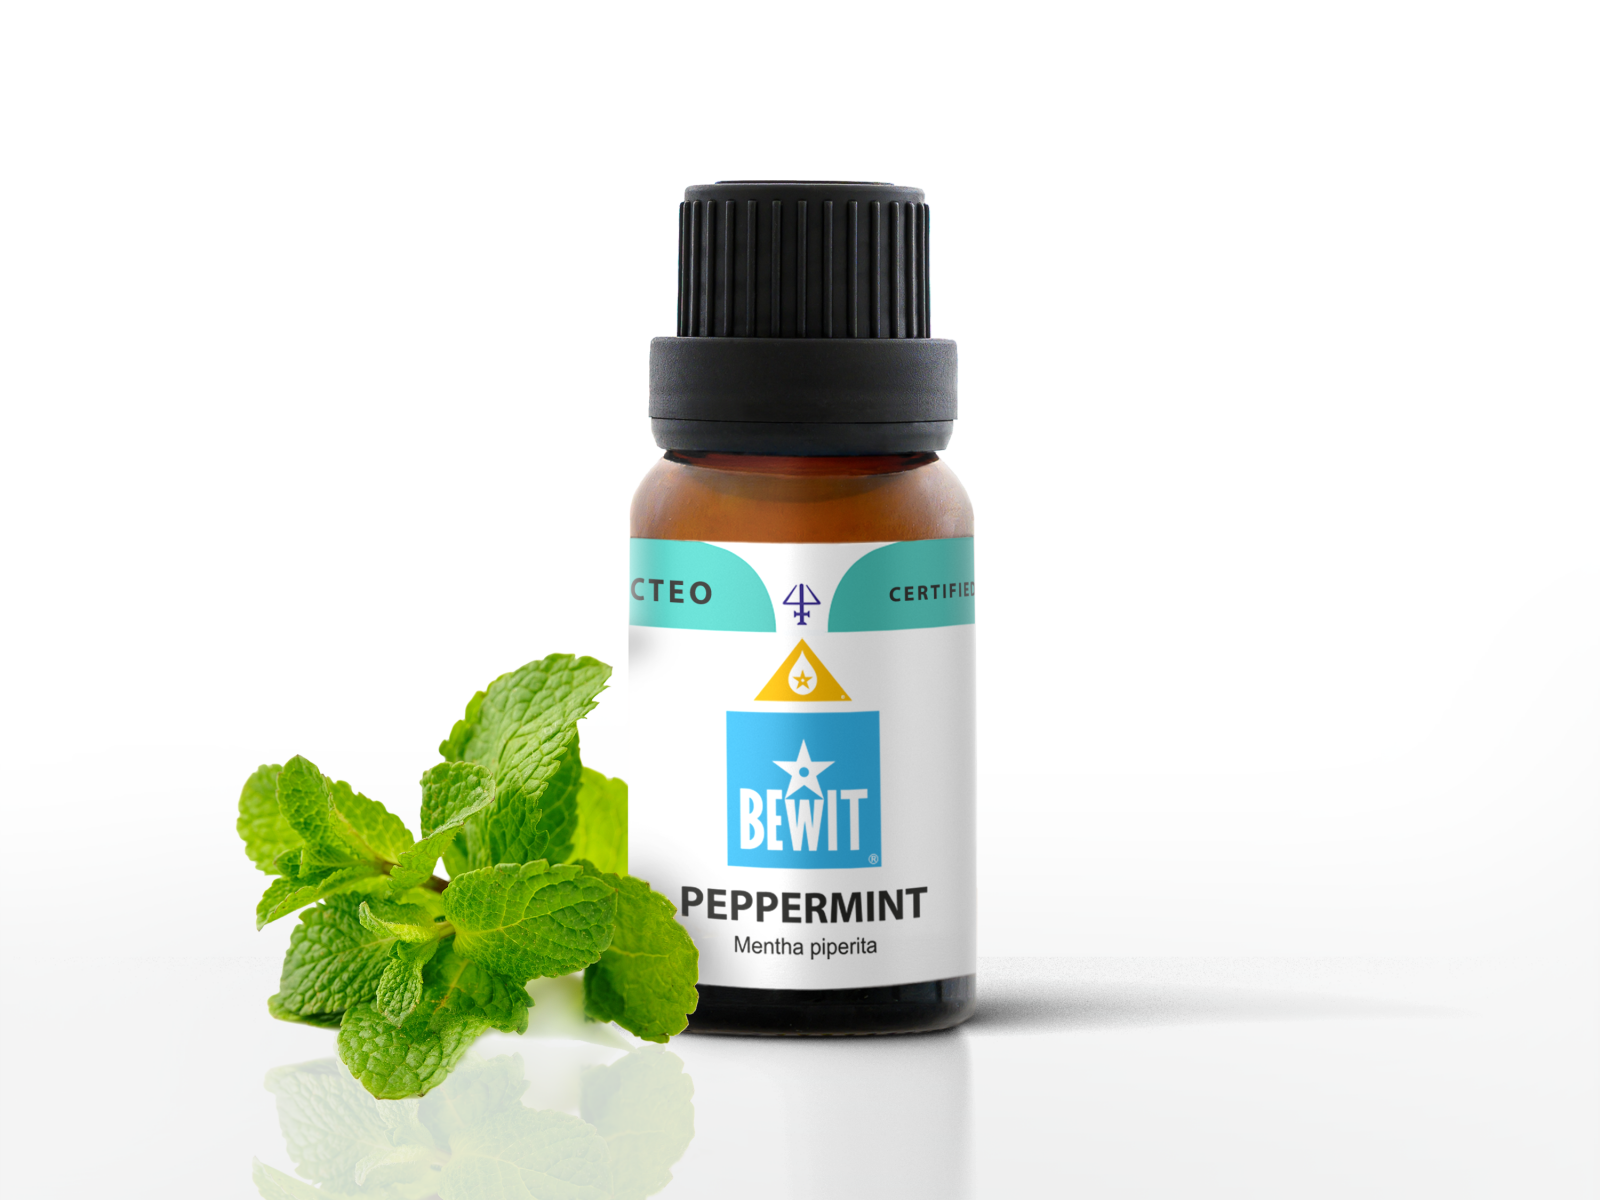 Peppermint - It is a 100% pure essential oil